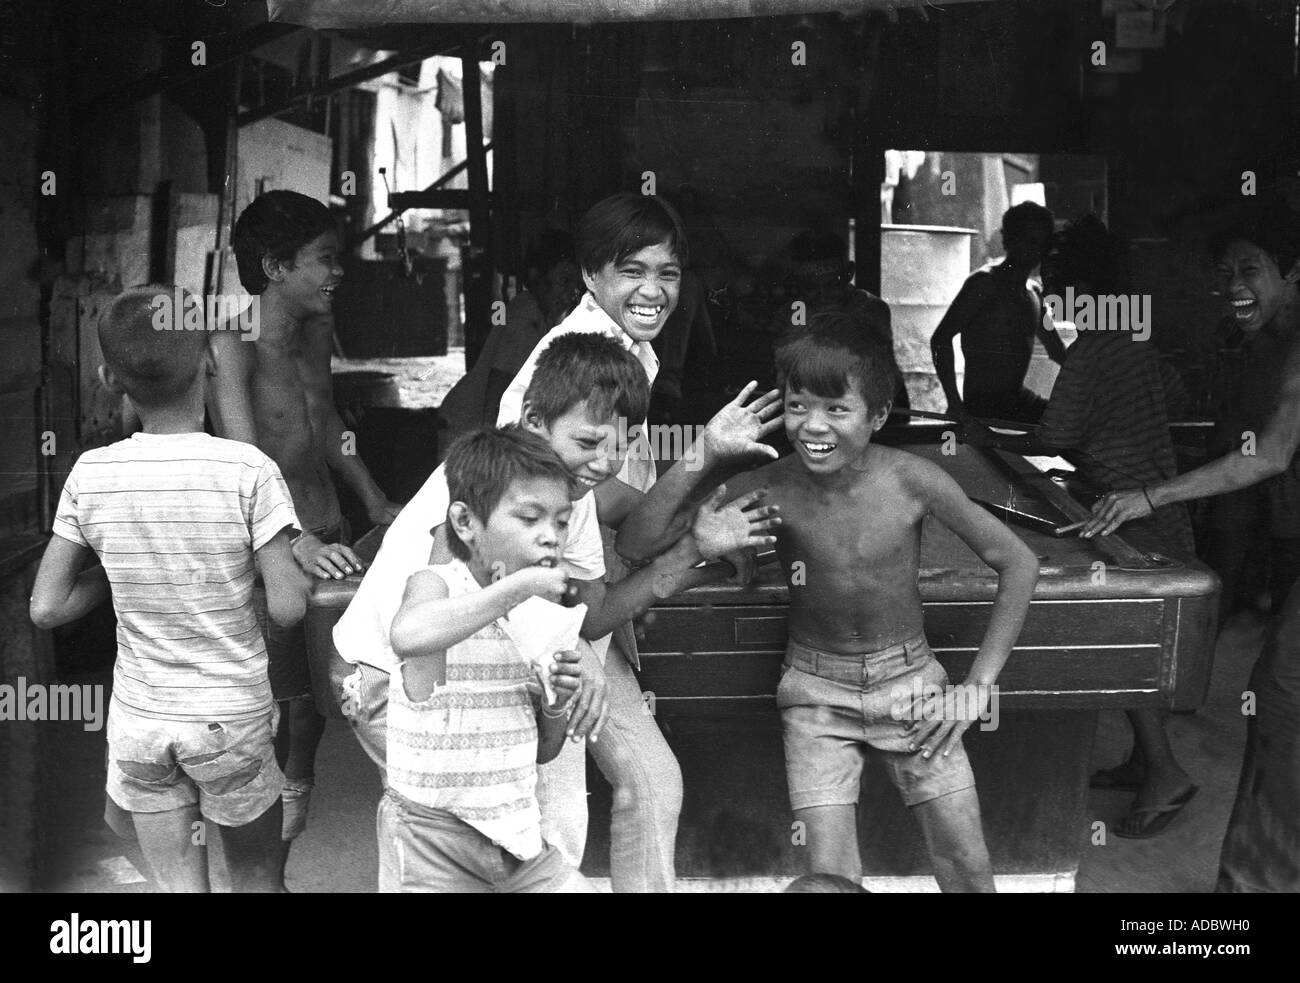 Young boys in Manila act up for the camera. Stock Photo